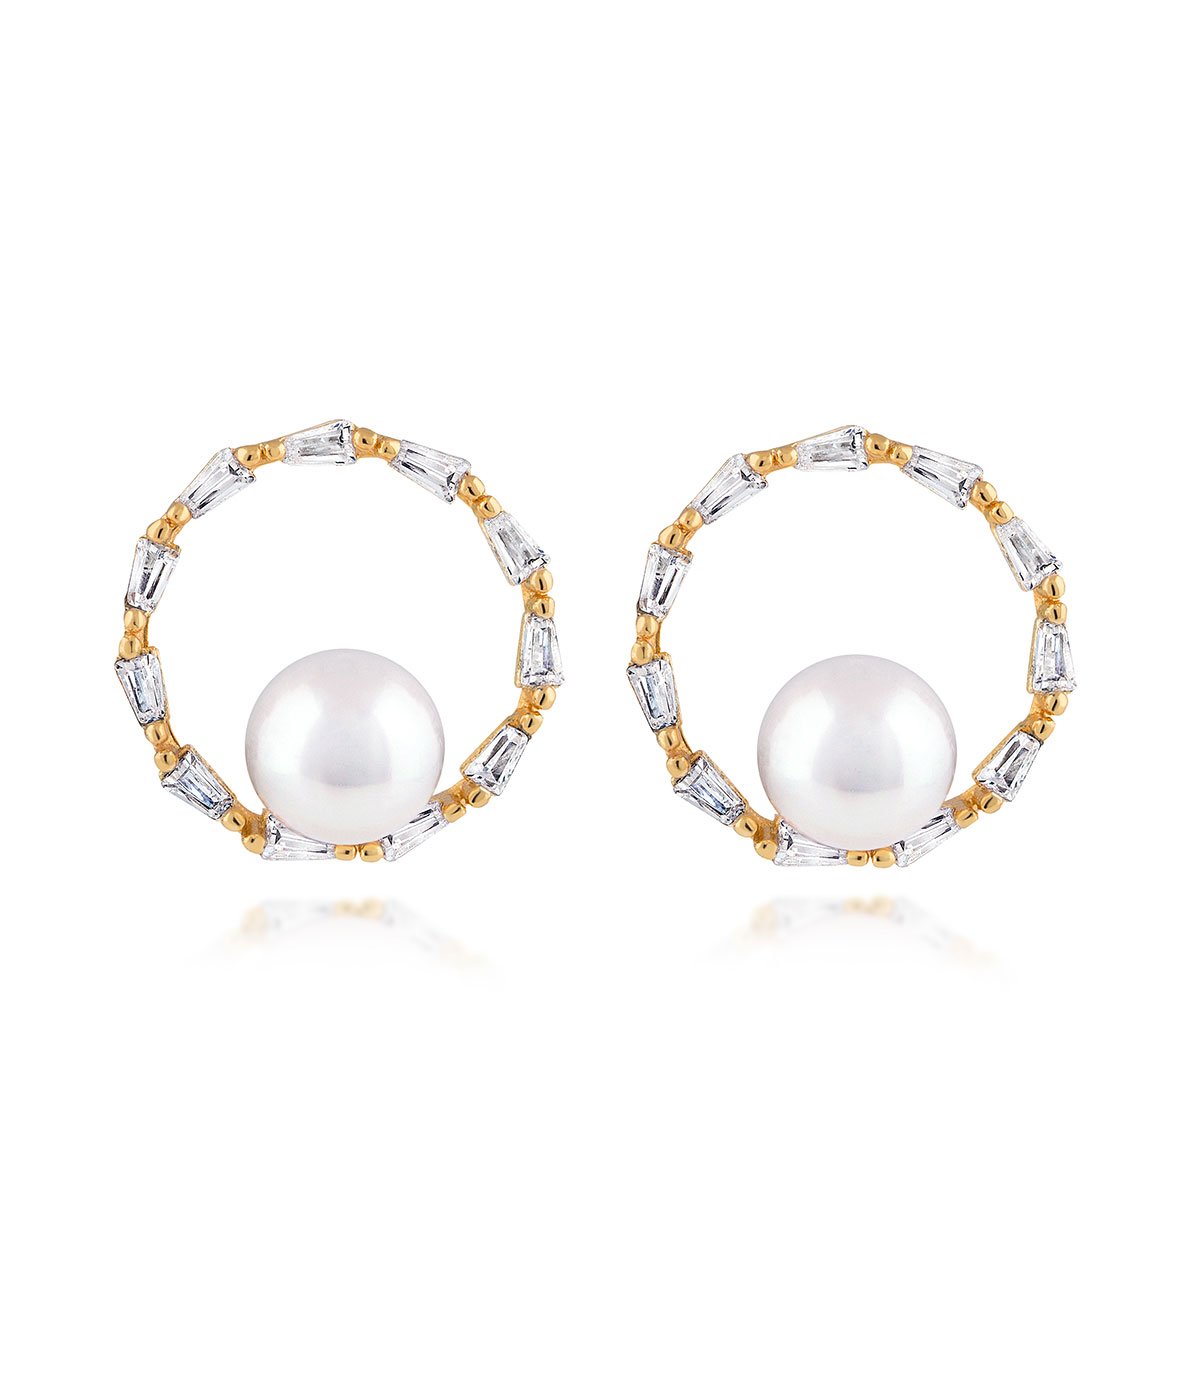 18k Yellow Gold Vermeil Halo Freshwater Pearl Earrings Sparkling Cubic Zirconia White